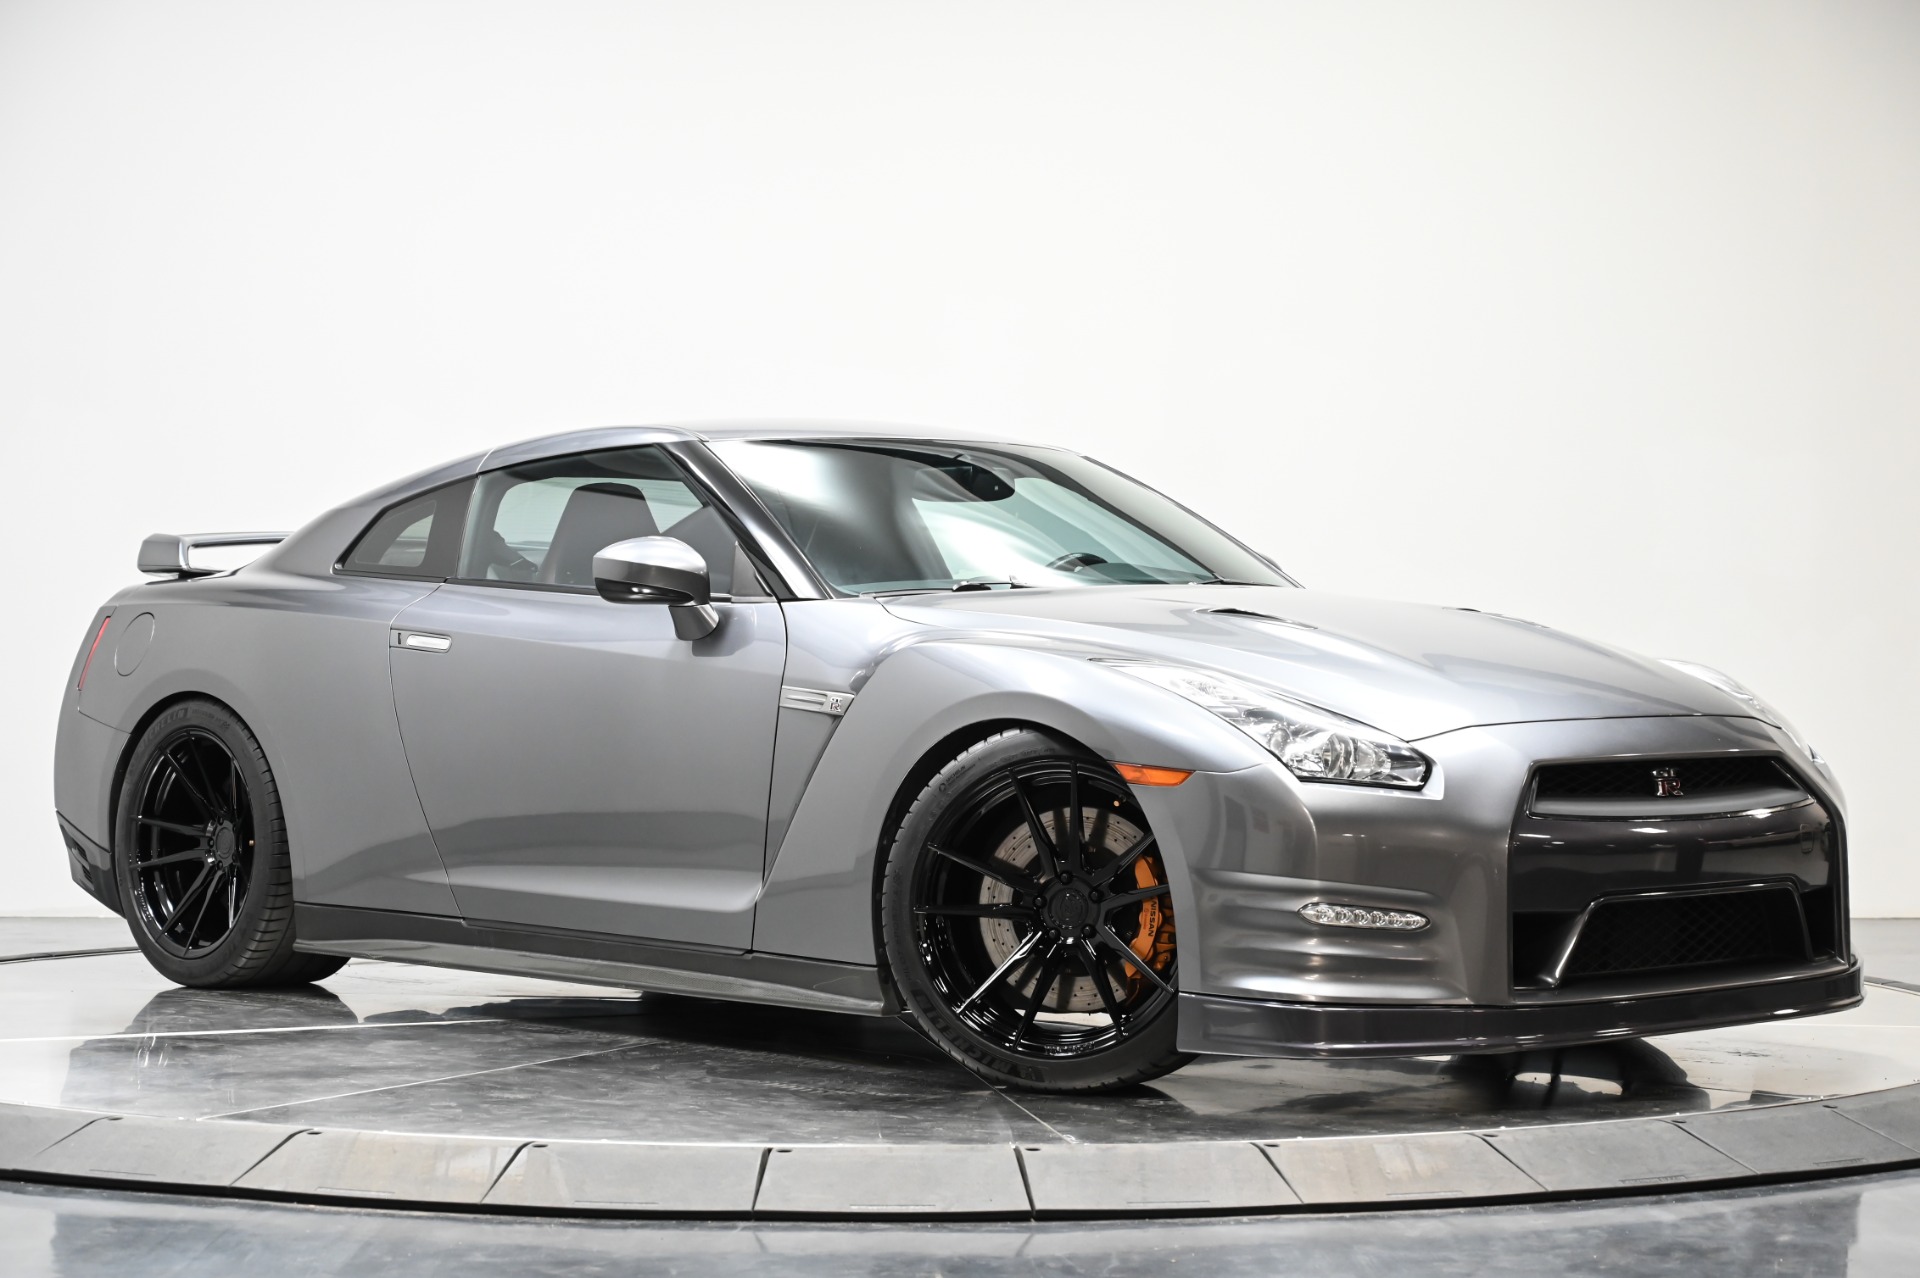 Used 2012 Nissan GT-R Black Edition For Sale (Sold)